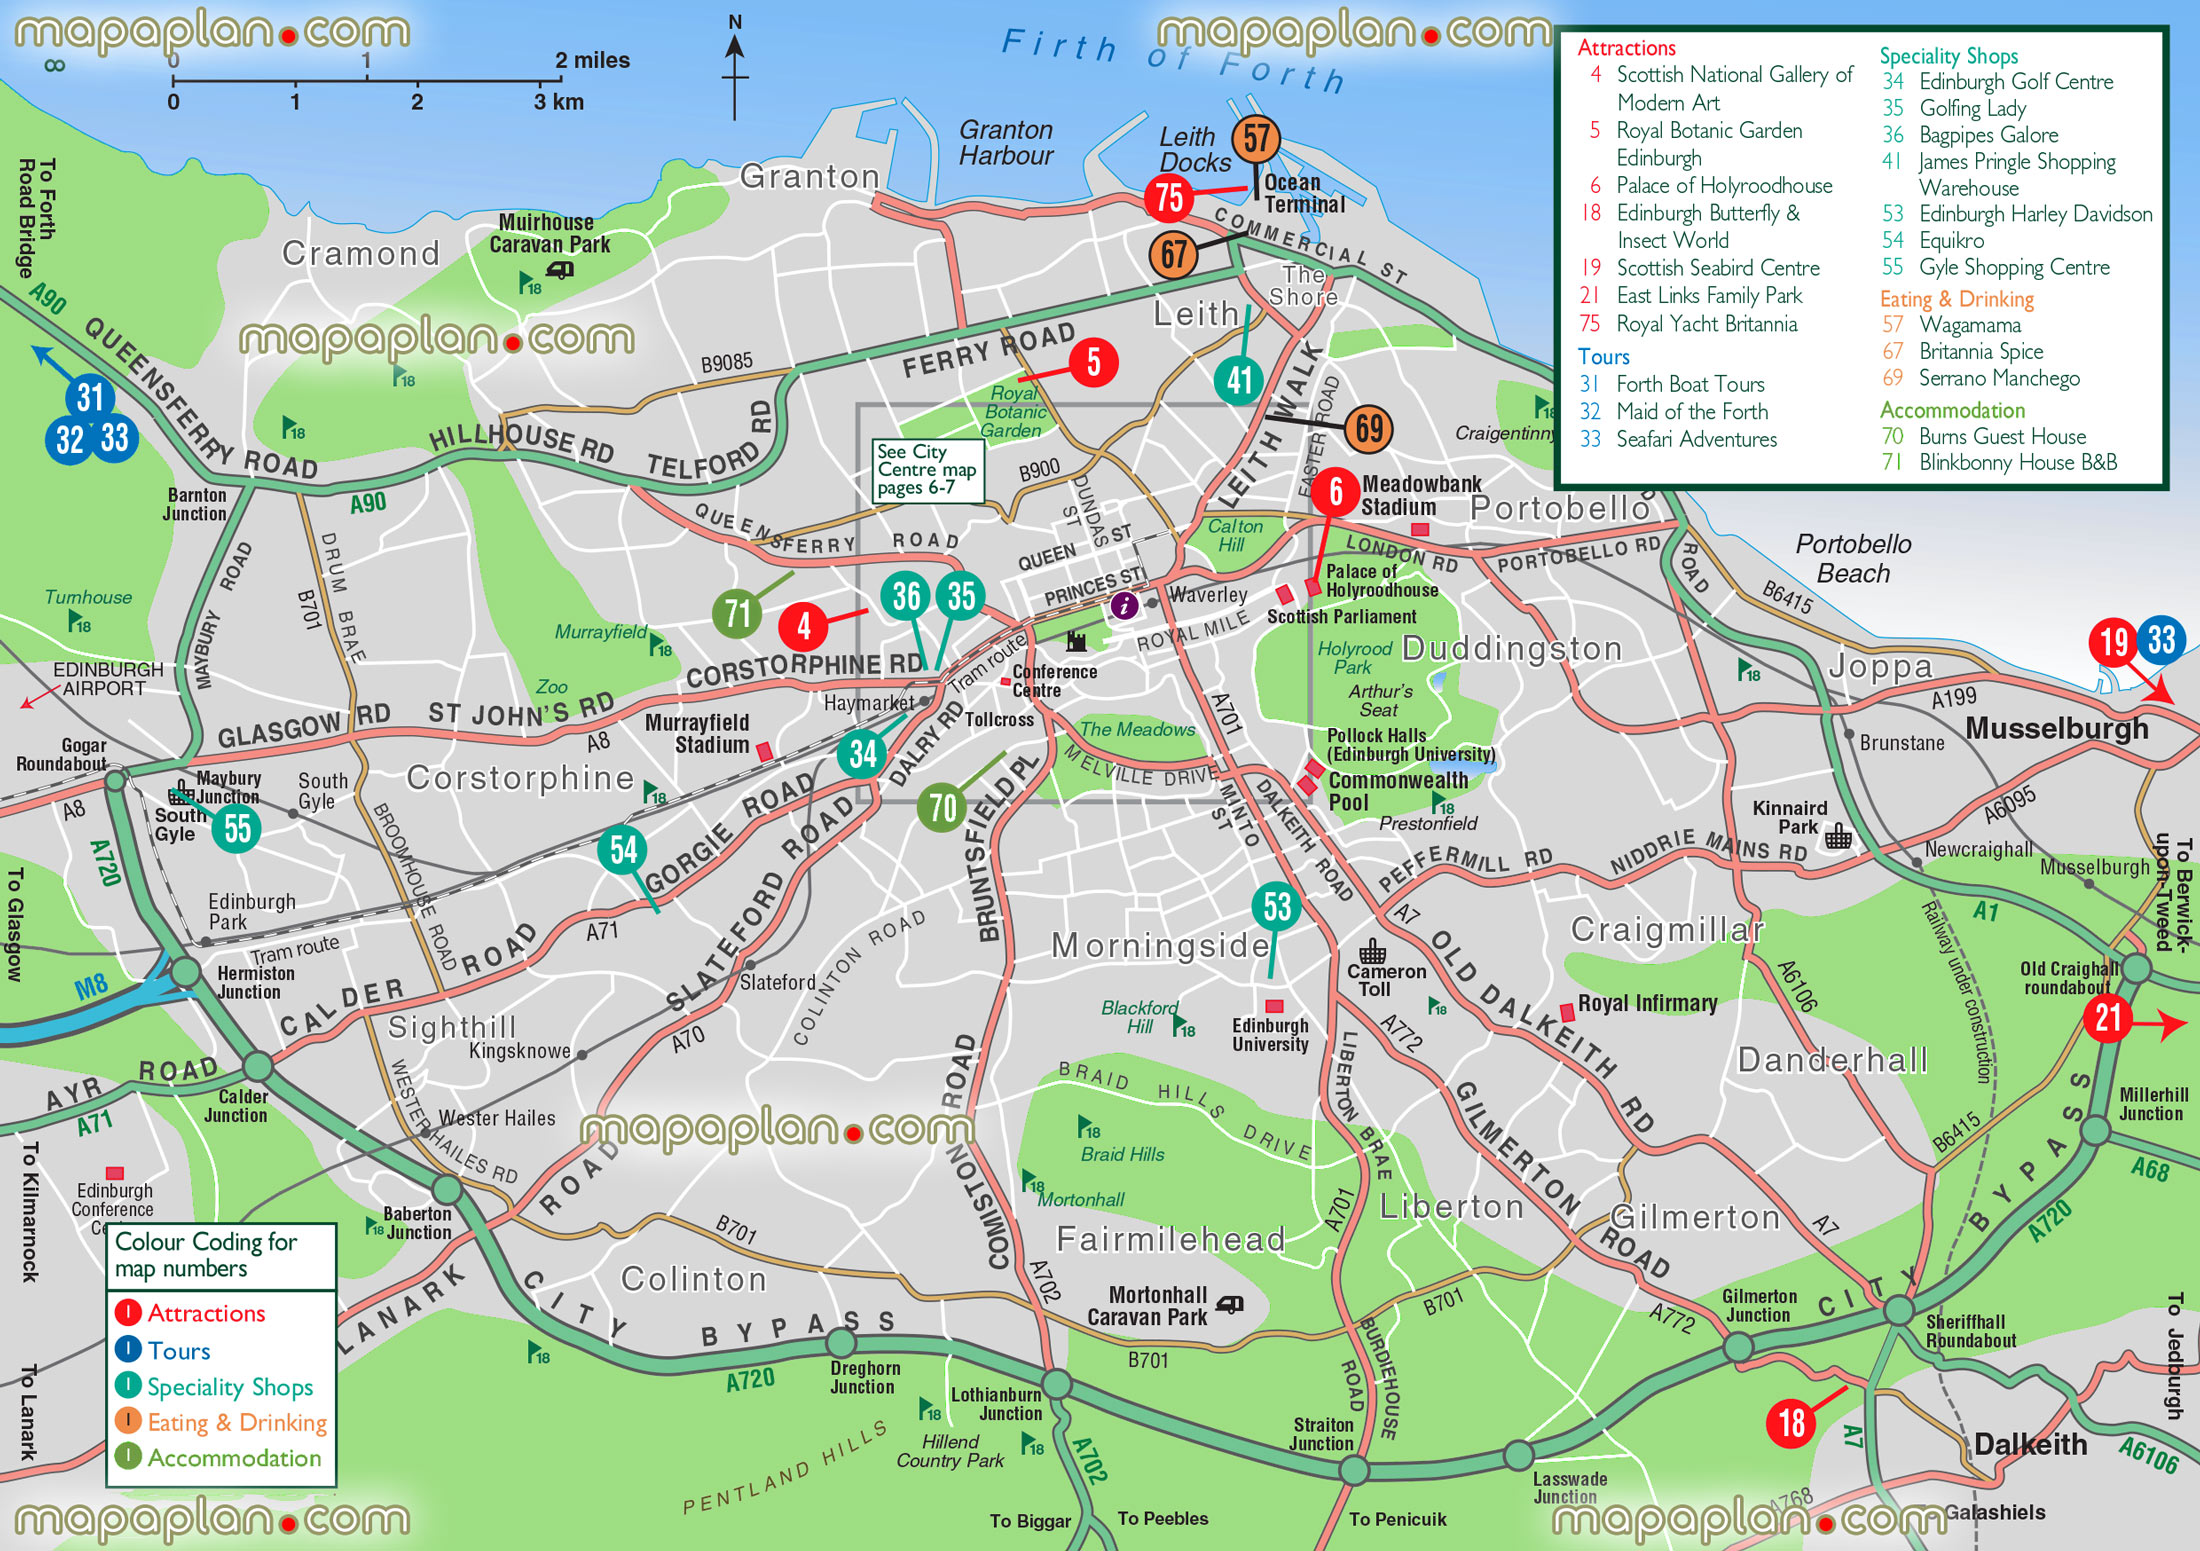 greater edinburgh tourist information guide attractions rail network public transportation railway stations routes stops train lines networks Edinburgh Top tourist attractions map